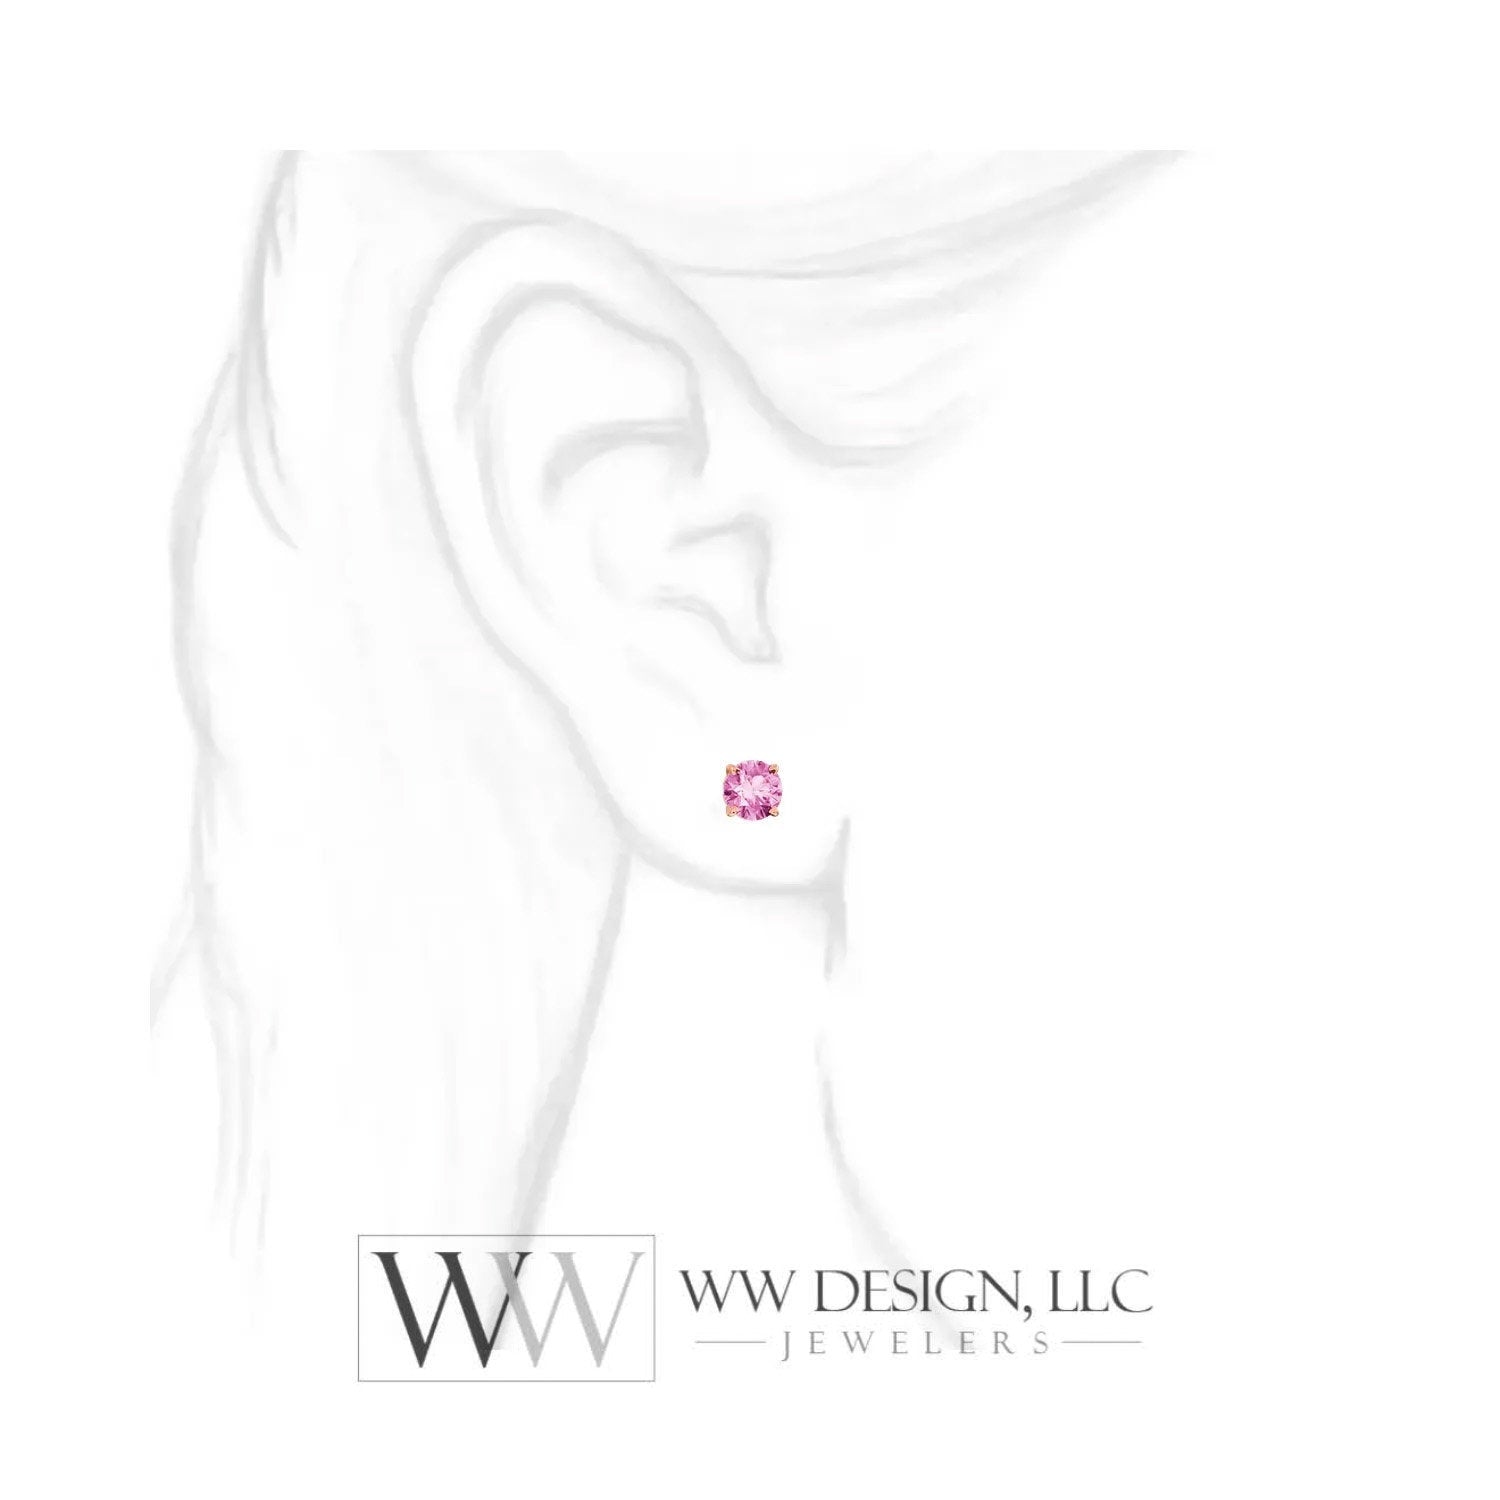 Genuine AAA Pink Sapphire Earring Studs 5mm 1.32 ctw (each 0.66cts) Post w/ 14k Solid Gold (Yellow, Rose, White)Silver, Platinum Studs